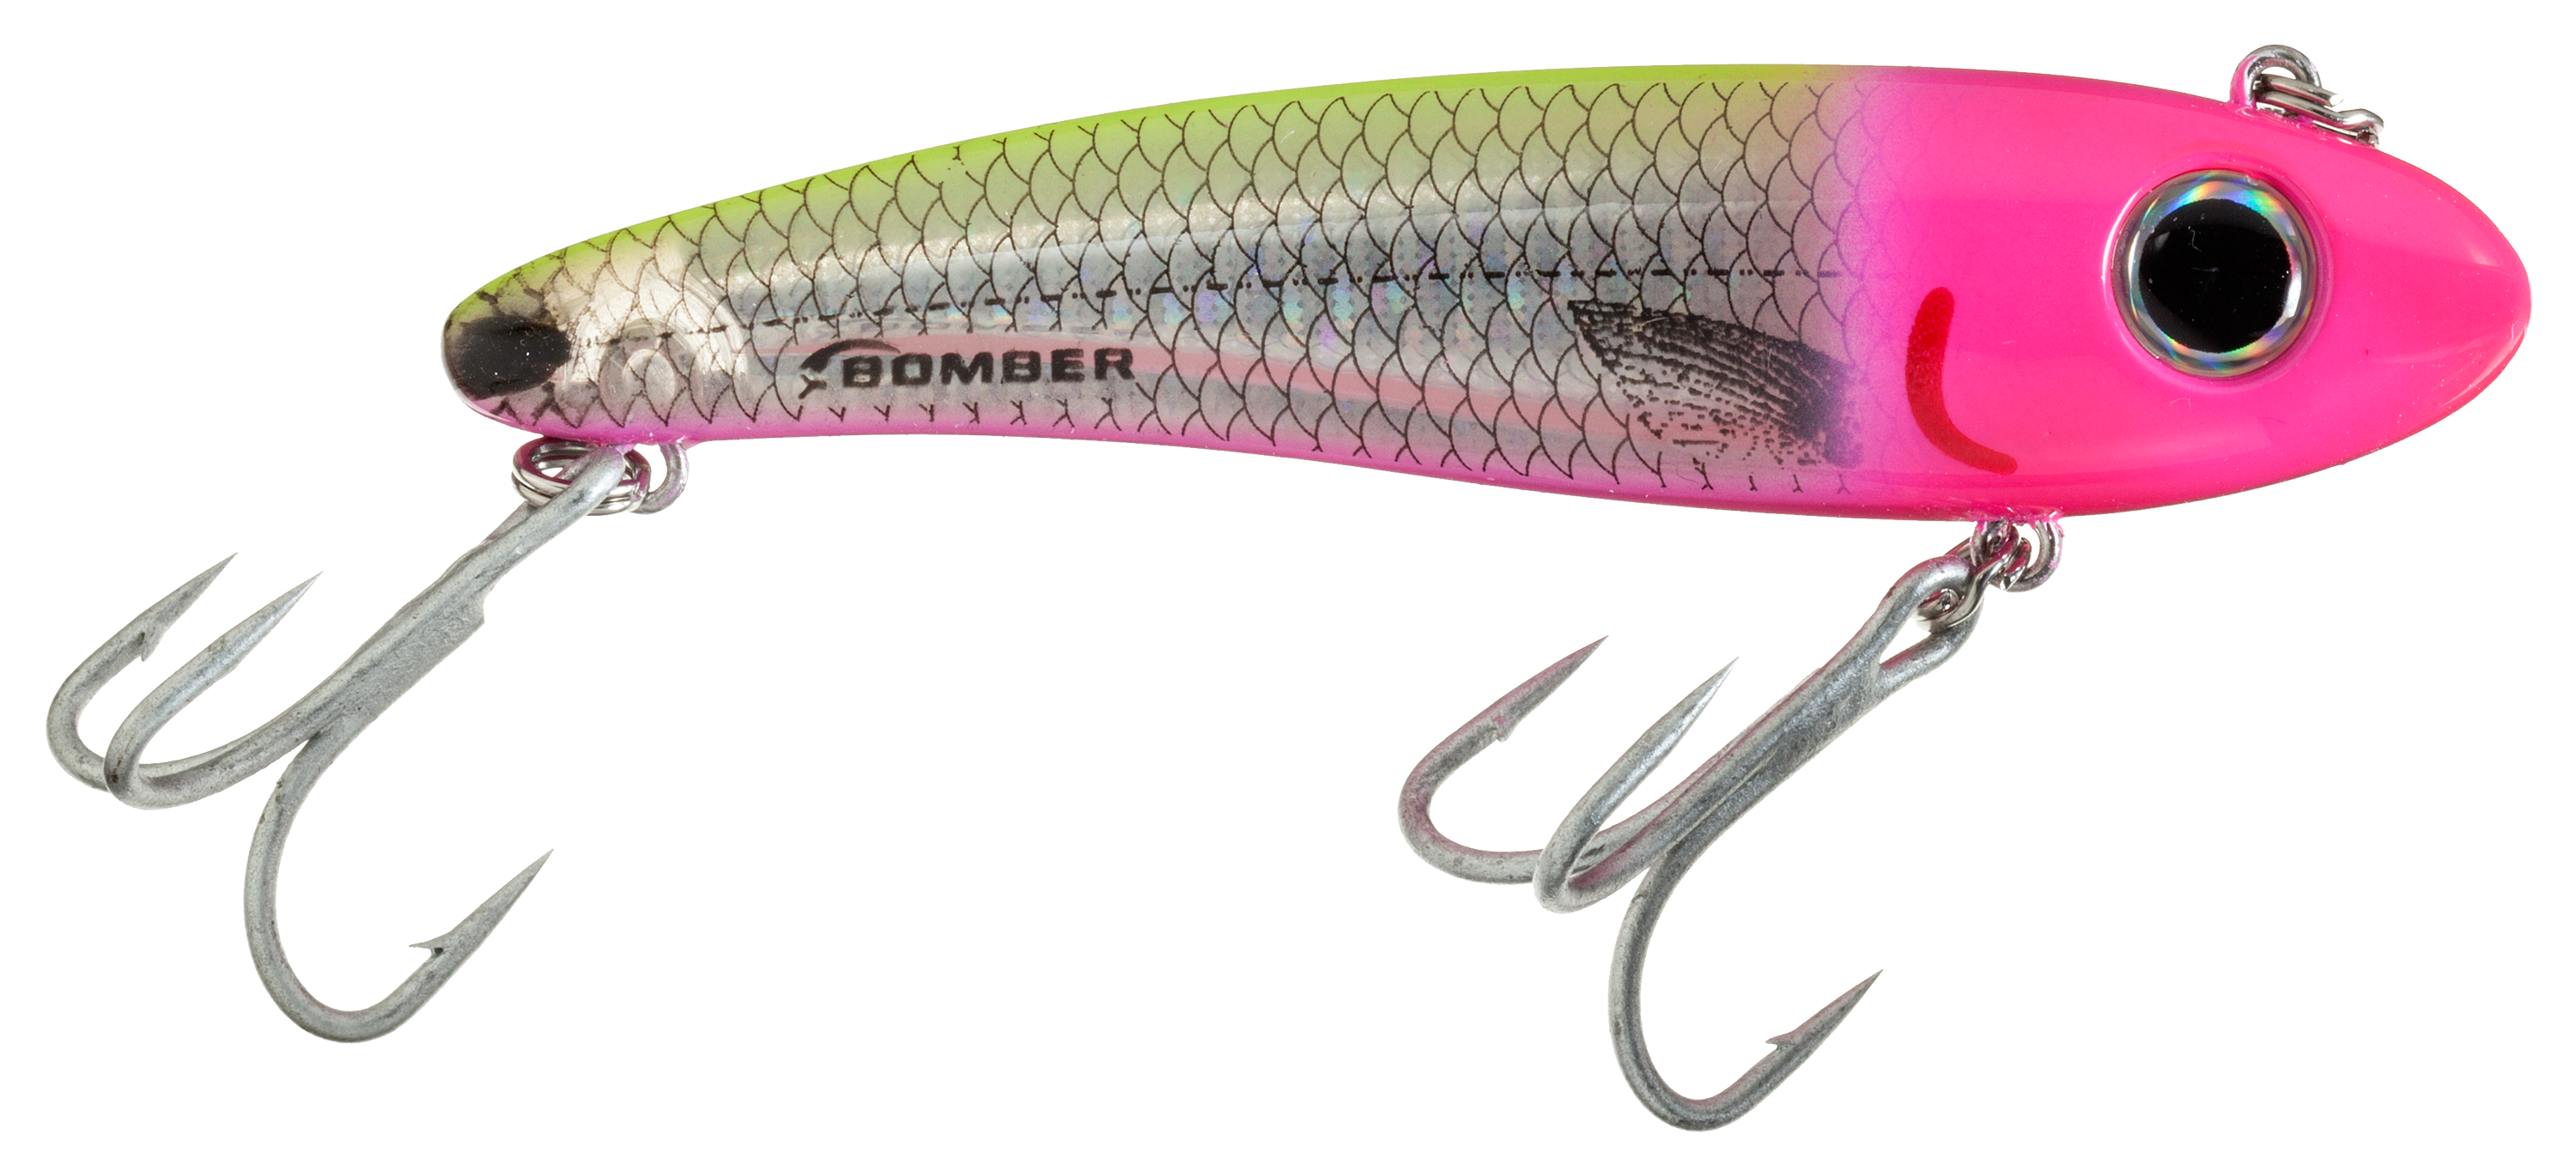 Bomber Lures Mullet Slow-Sinking Twitch, Walking Saltwater Fishing Lure,  Excellent for Speckled Trout, Redfish, Stripers and More, 3 1/2, 5/8 oz,  Bone Orange Throat : Sports & Outdoors 